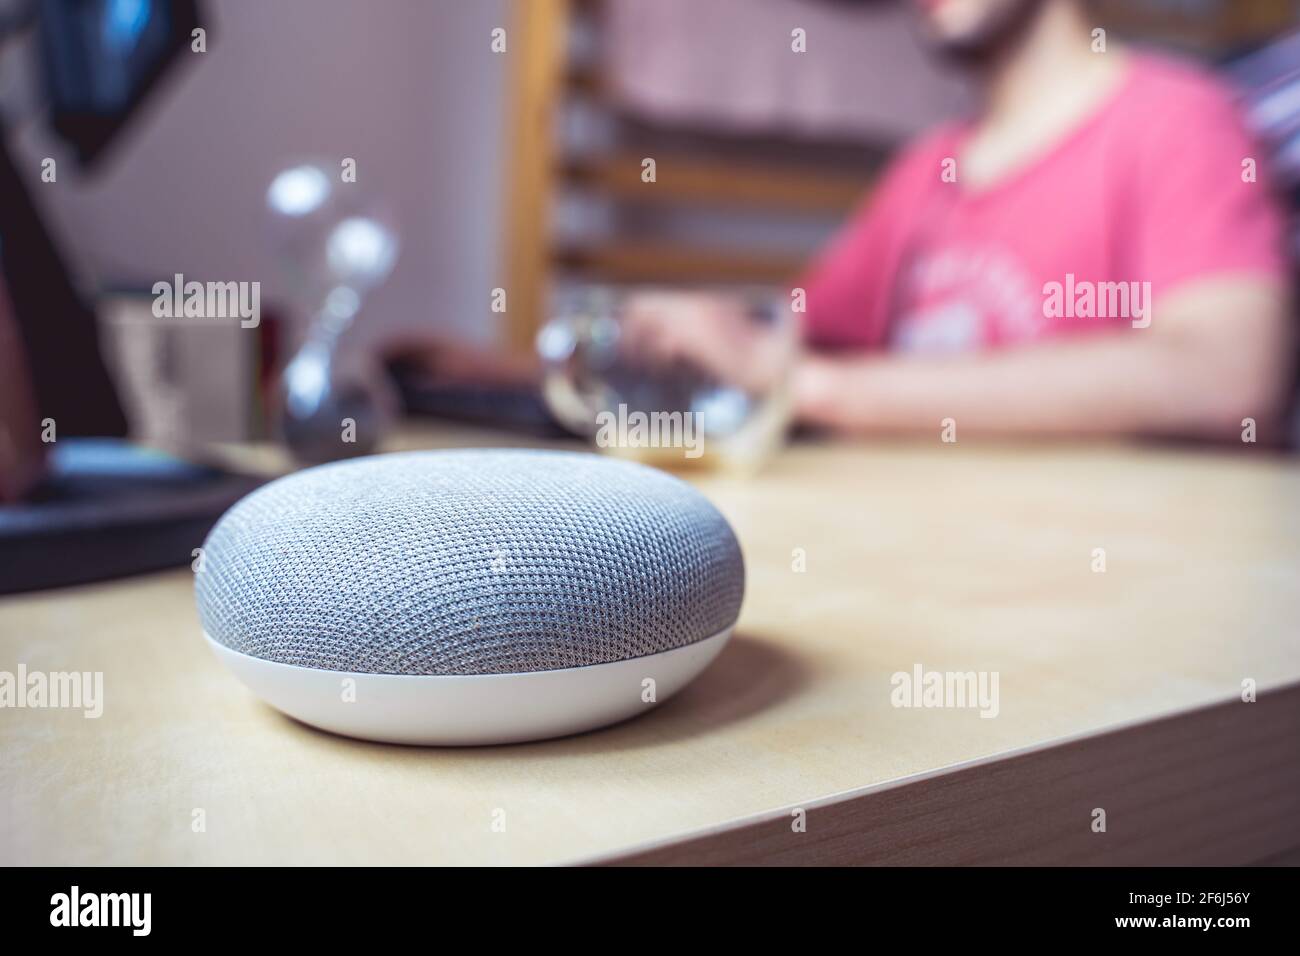 voice controlled smart speaker in a interior. male working in background Stock Photo